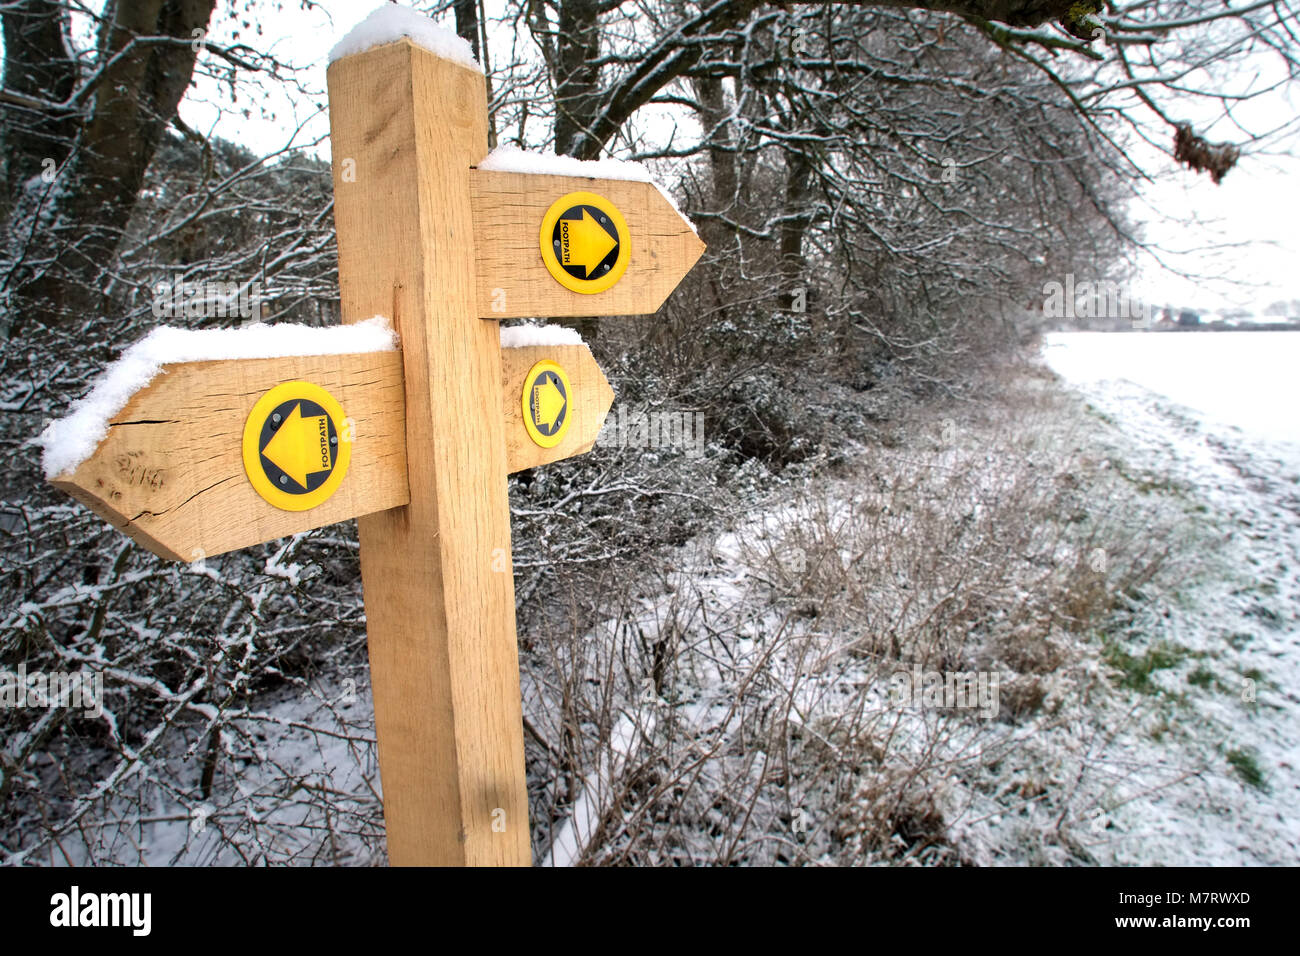 Footpath signpost in mid winter Stock Photo